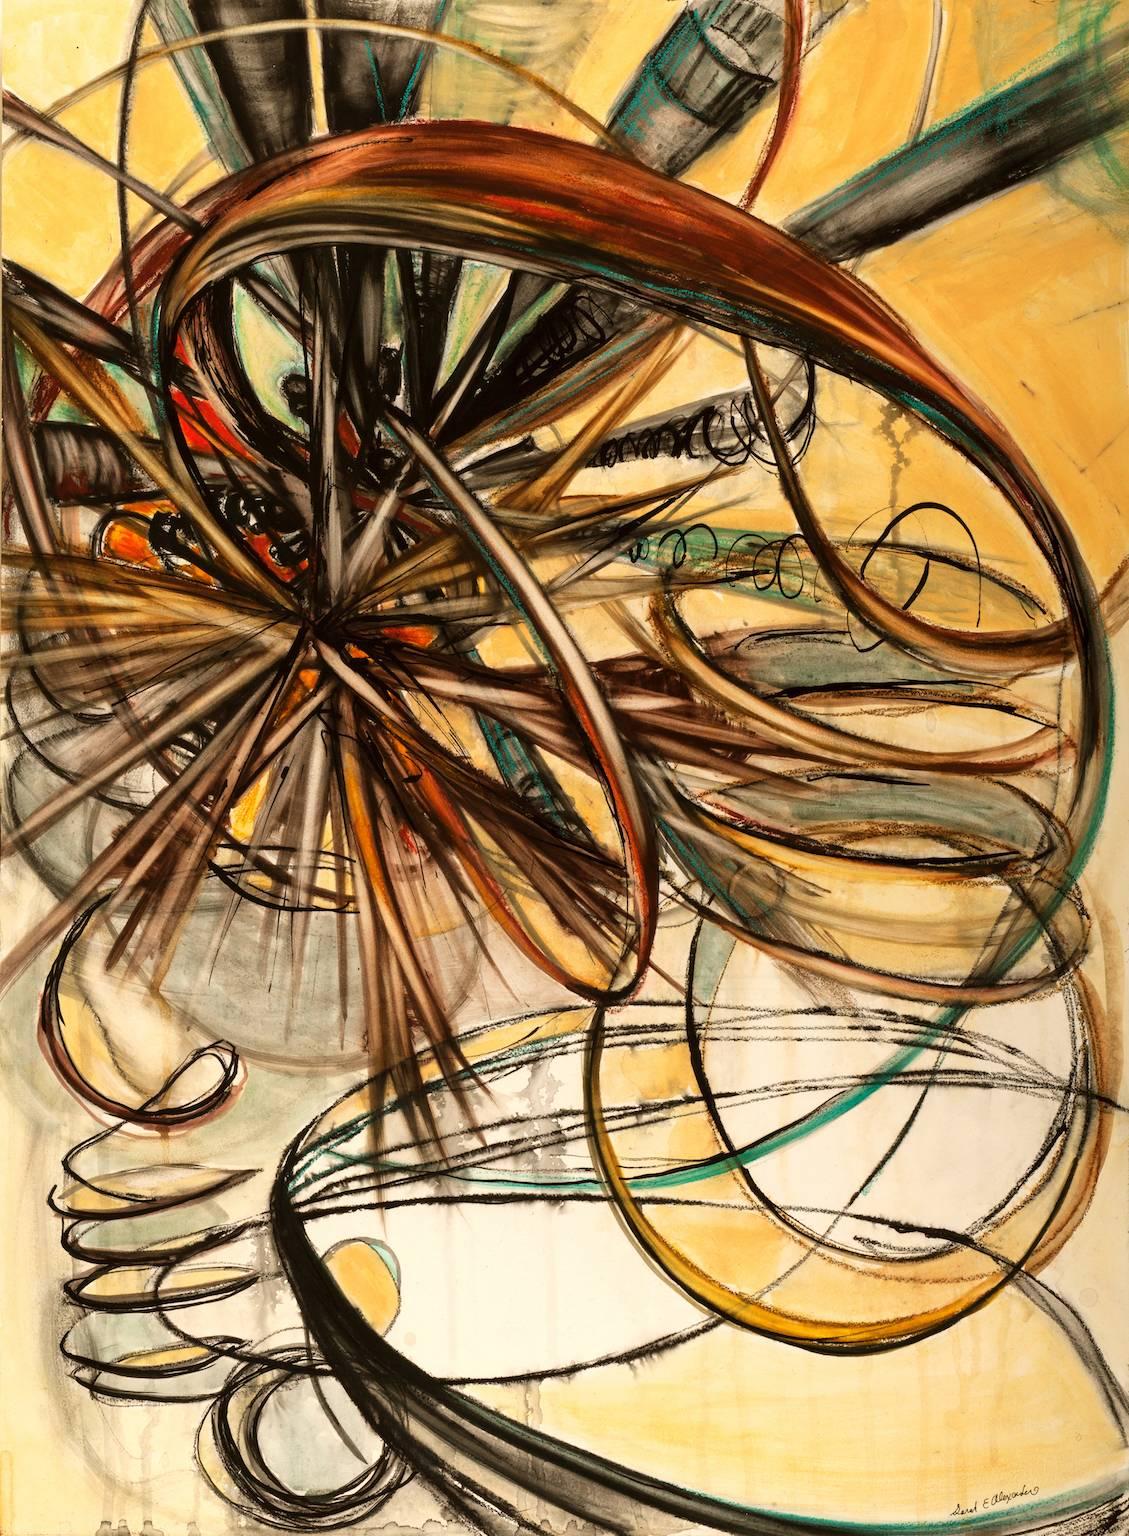 "Wired, Out of Time", abstract, charcoal, yellow, sepia, watercolor painting